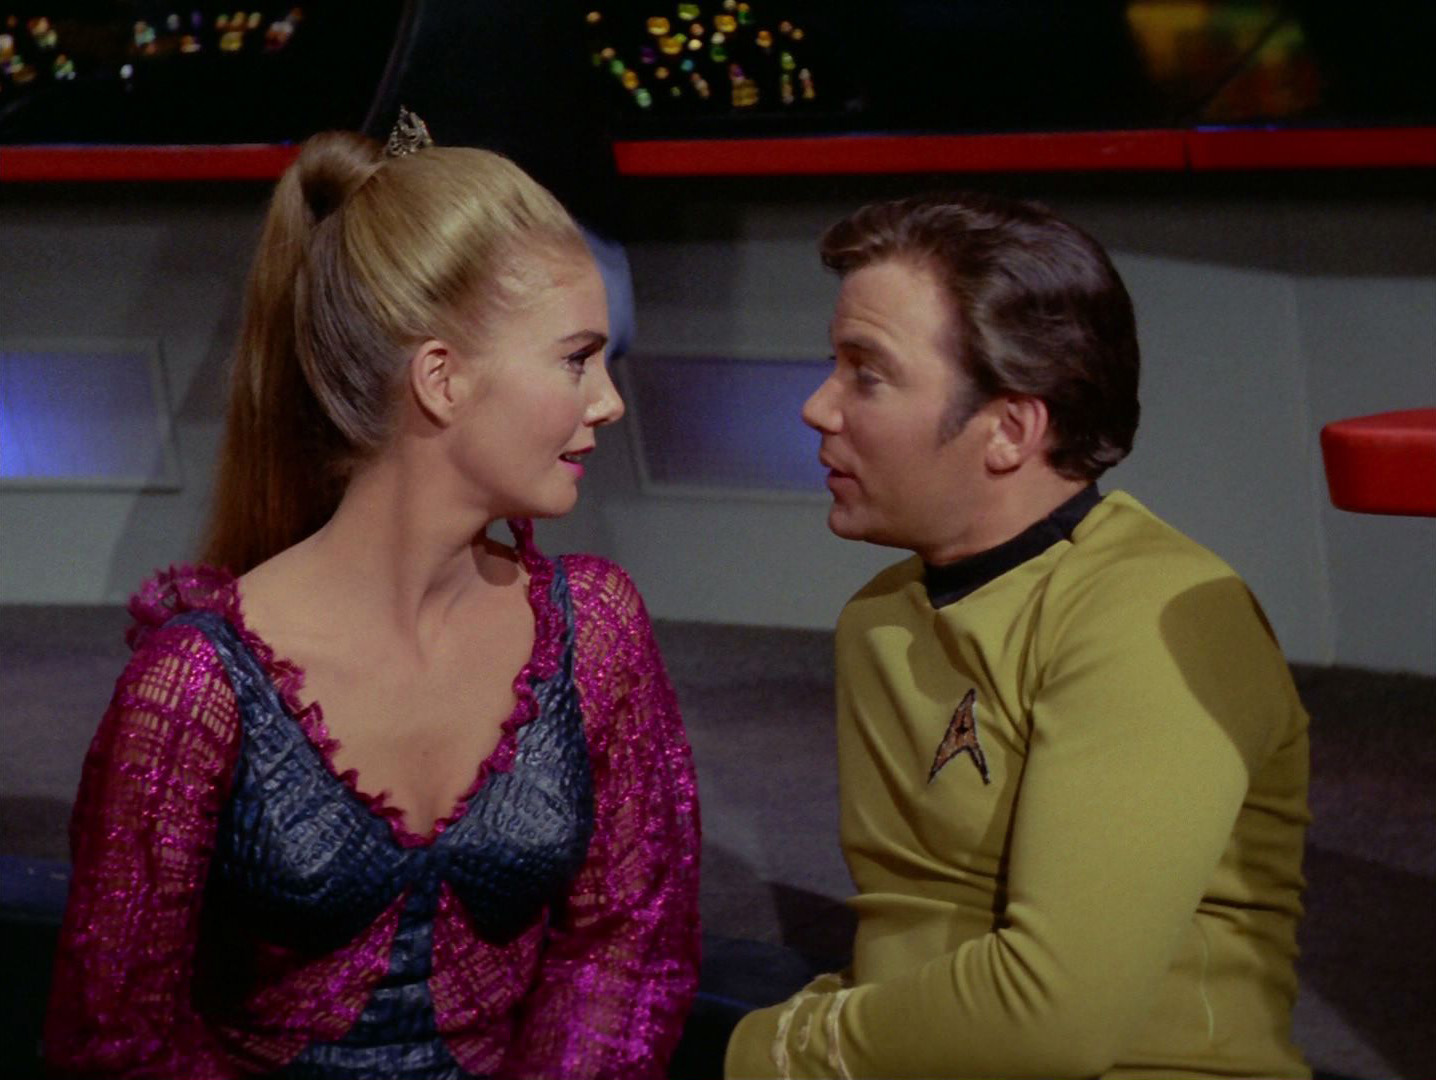 Kirk and Odonna make eyes at each other on the bridge